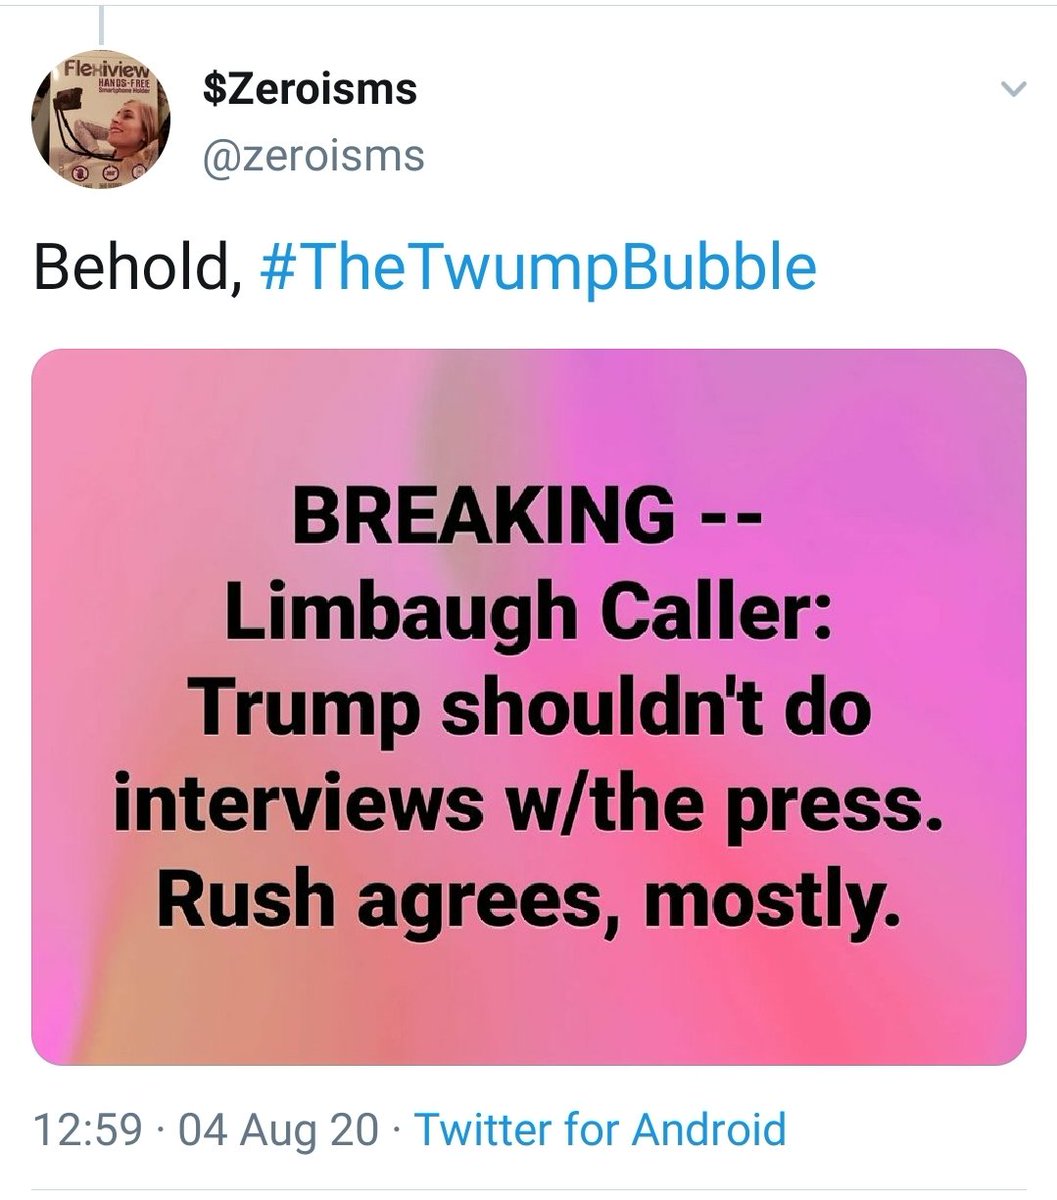  #Behold,  #TheTwumpBubble  #SocietyForBadLogic: http://facebook.com/groups/128554637315041/permalink/1290267521143741/ #TheBickerfestVersion: http://facebook.com/groups/bickerfest/permalink/2836894599873289/ #ObtuuseAnon:(...Subscribers Only...) http://facebook.com/groups/163371620724268/permalink/1119865628408191/